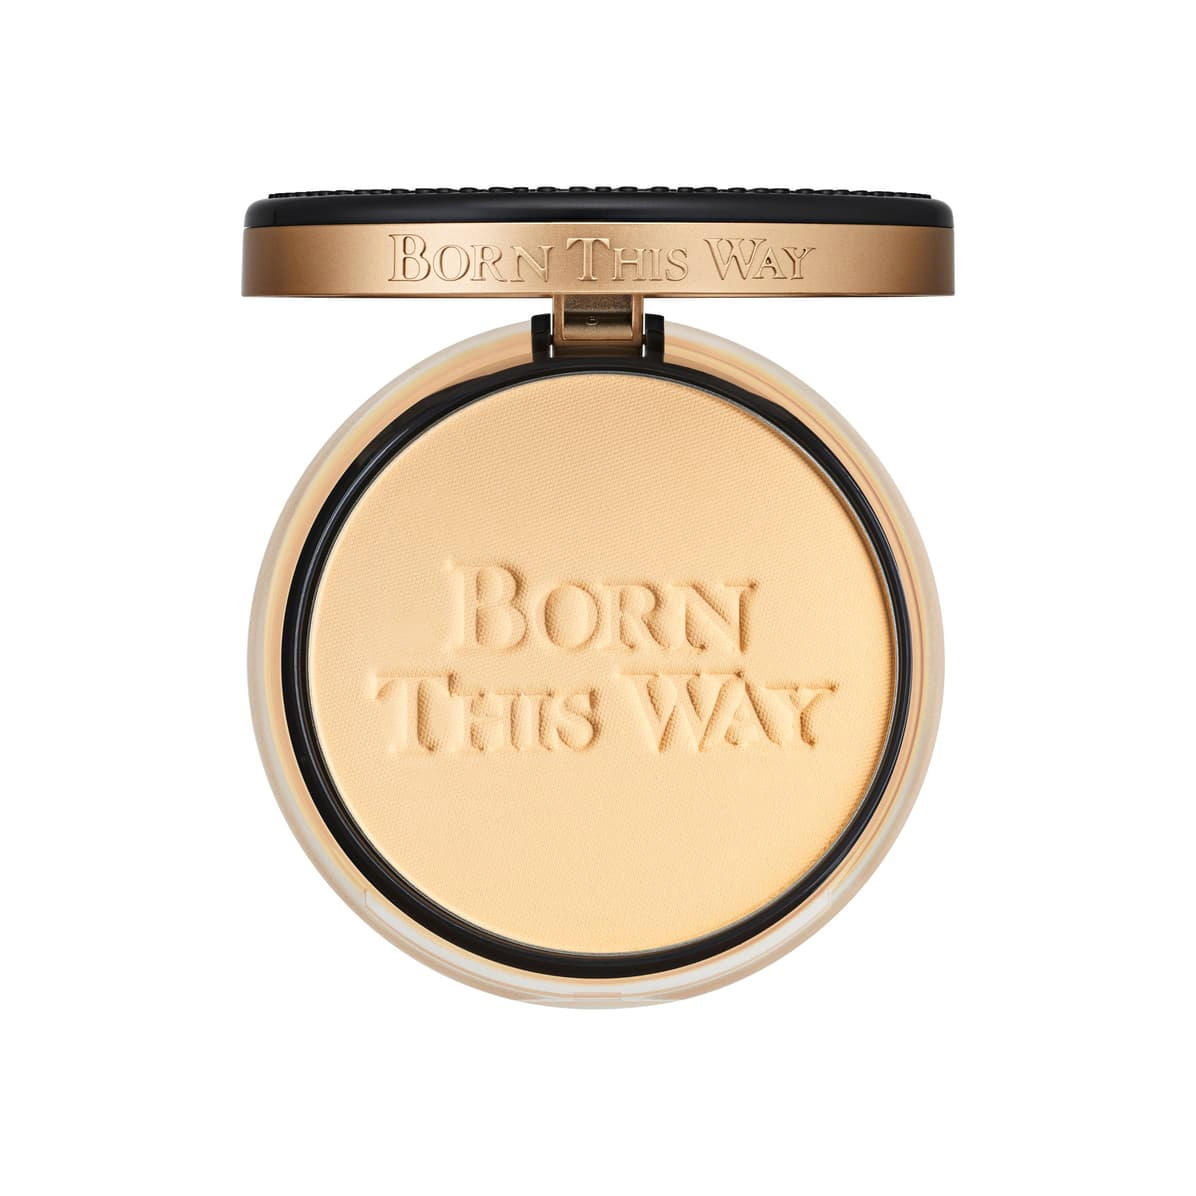 Too Faced Born This Way Pressed Powder Foundation Almond